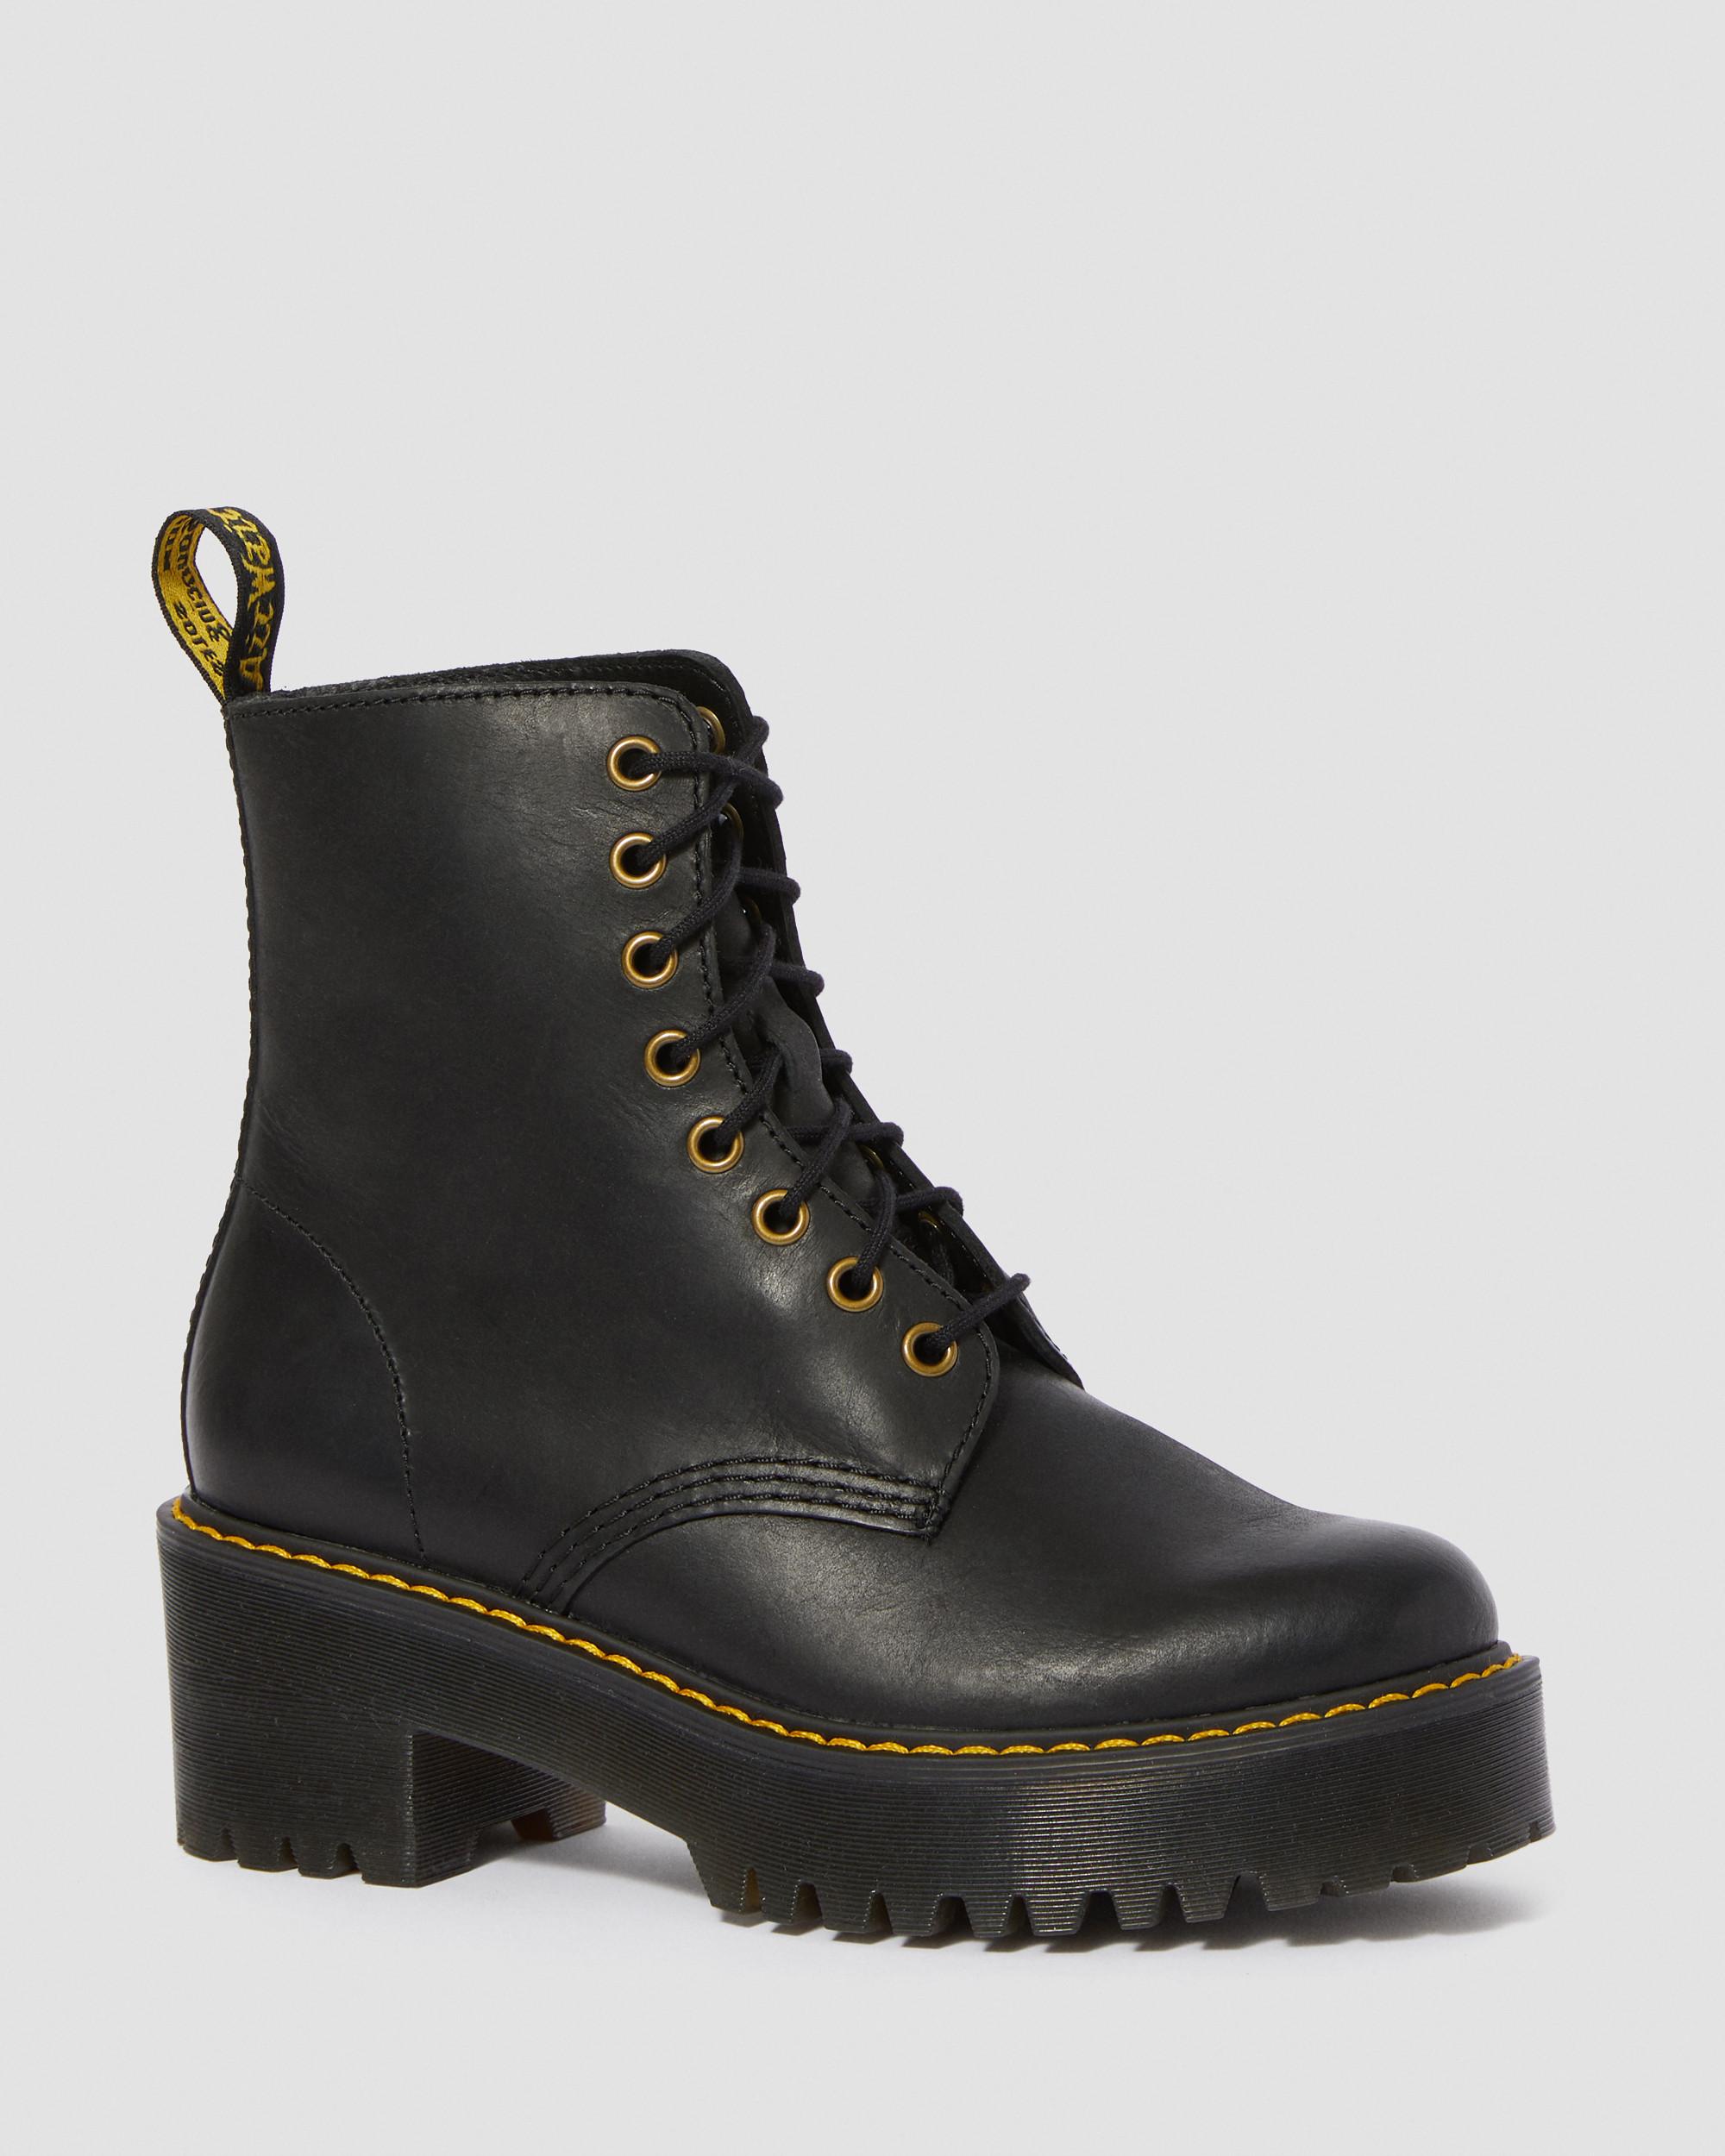 WYOMING LEATHER HEELED BOOTS | Dr. Martens